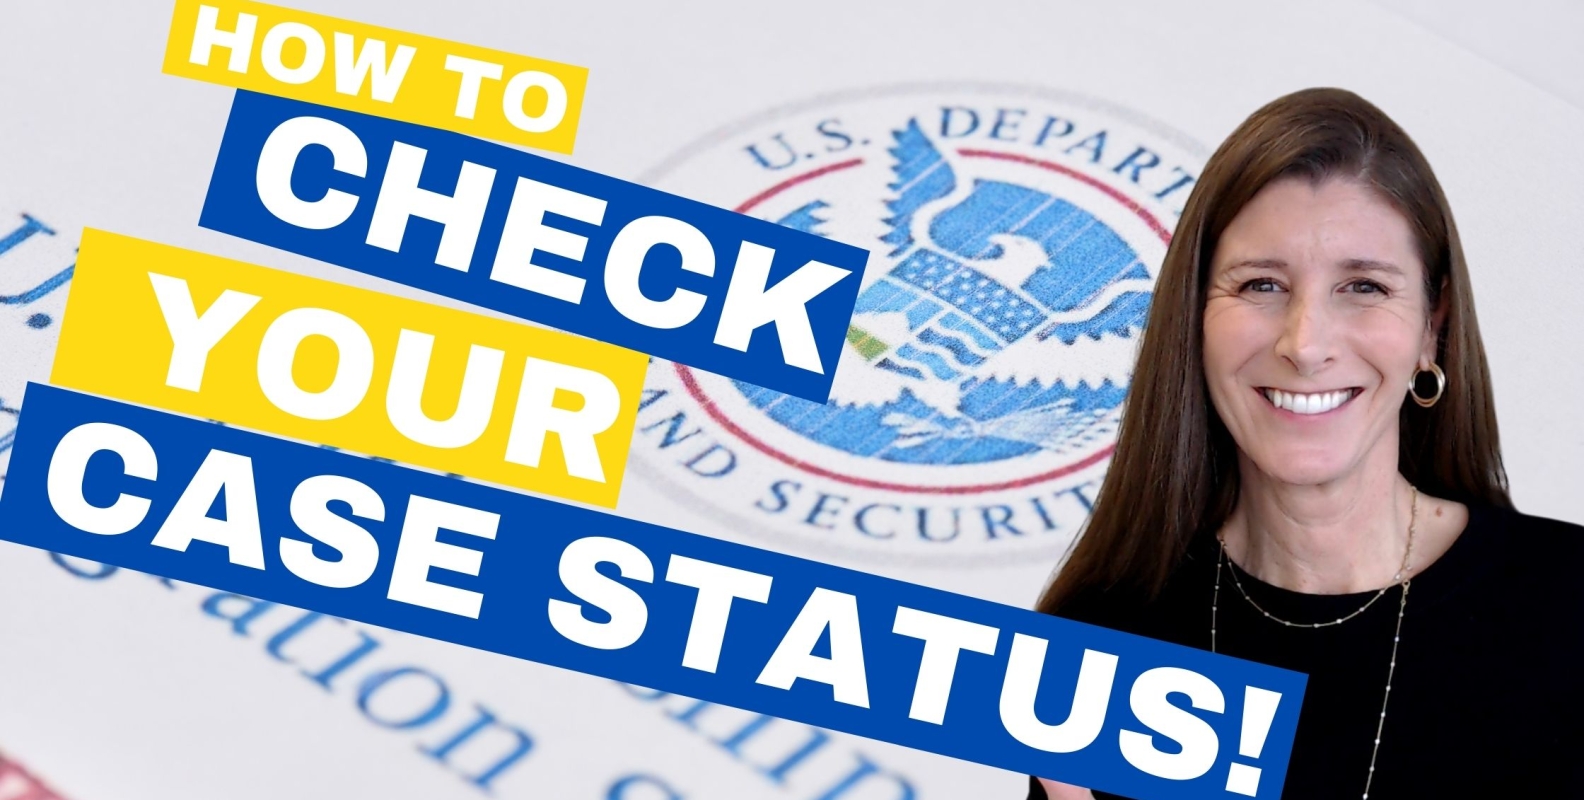 HOW TO CHECK IMMIGRATION CASE STATUS ONLINE Szew Law Group